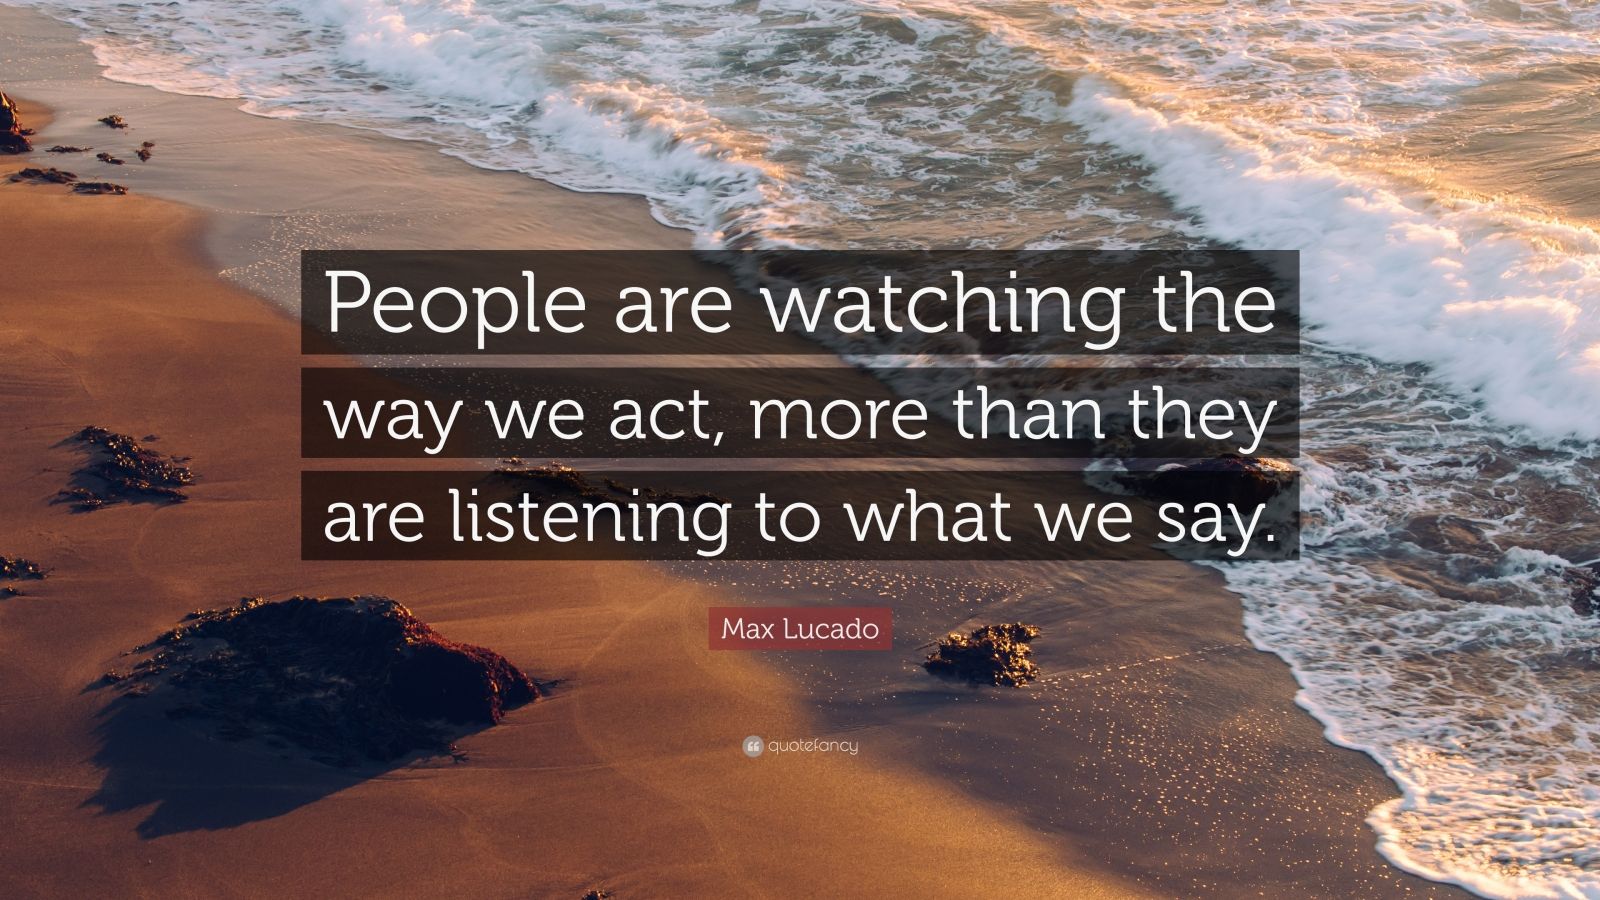 Max Lucado Quote: “People are watching the way we act, more than they ...